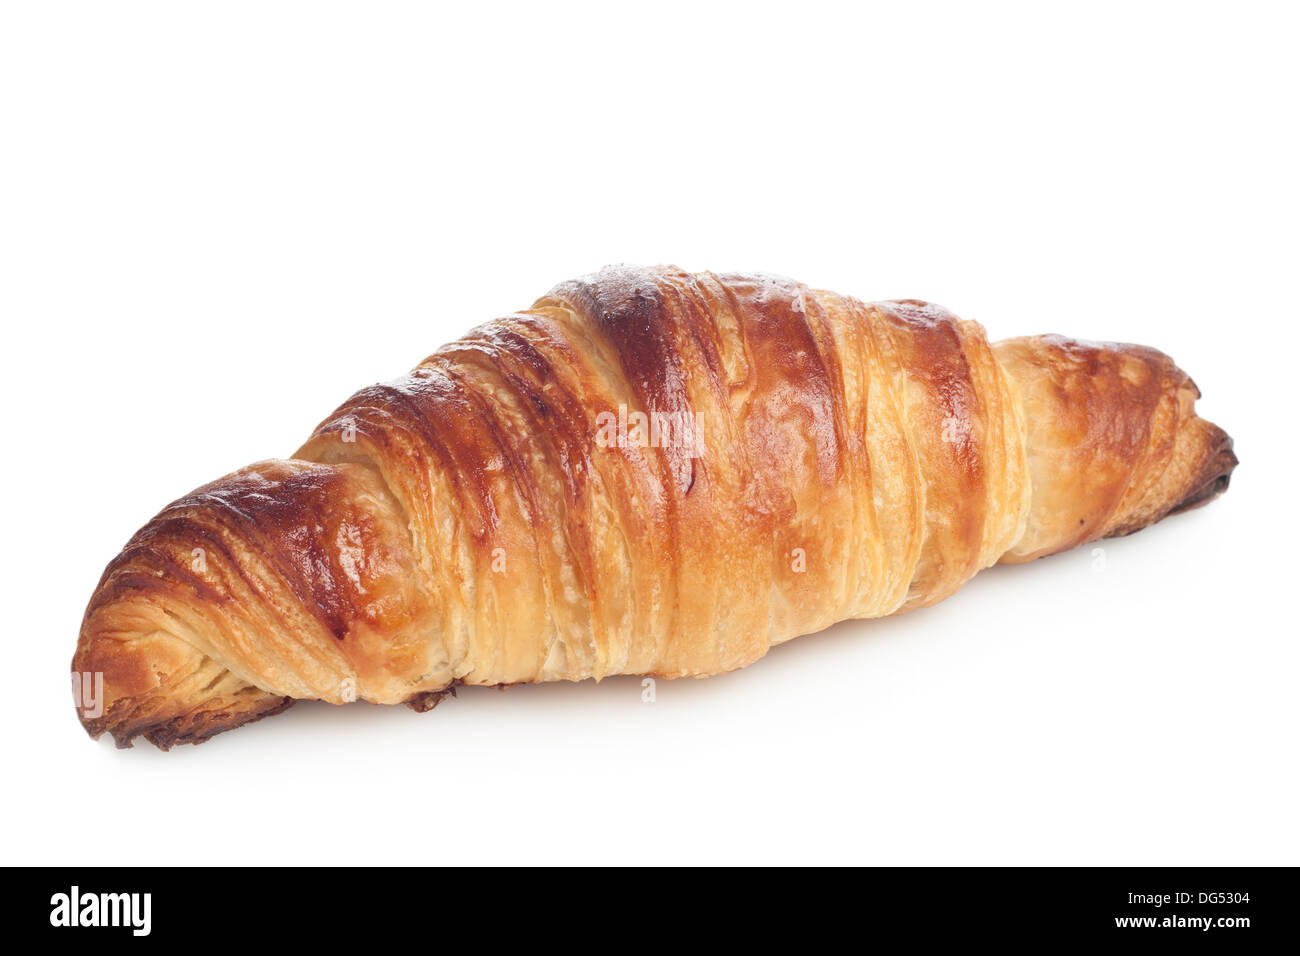 Butter croissant isolated on white Stock Photo